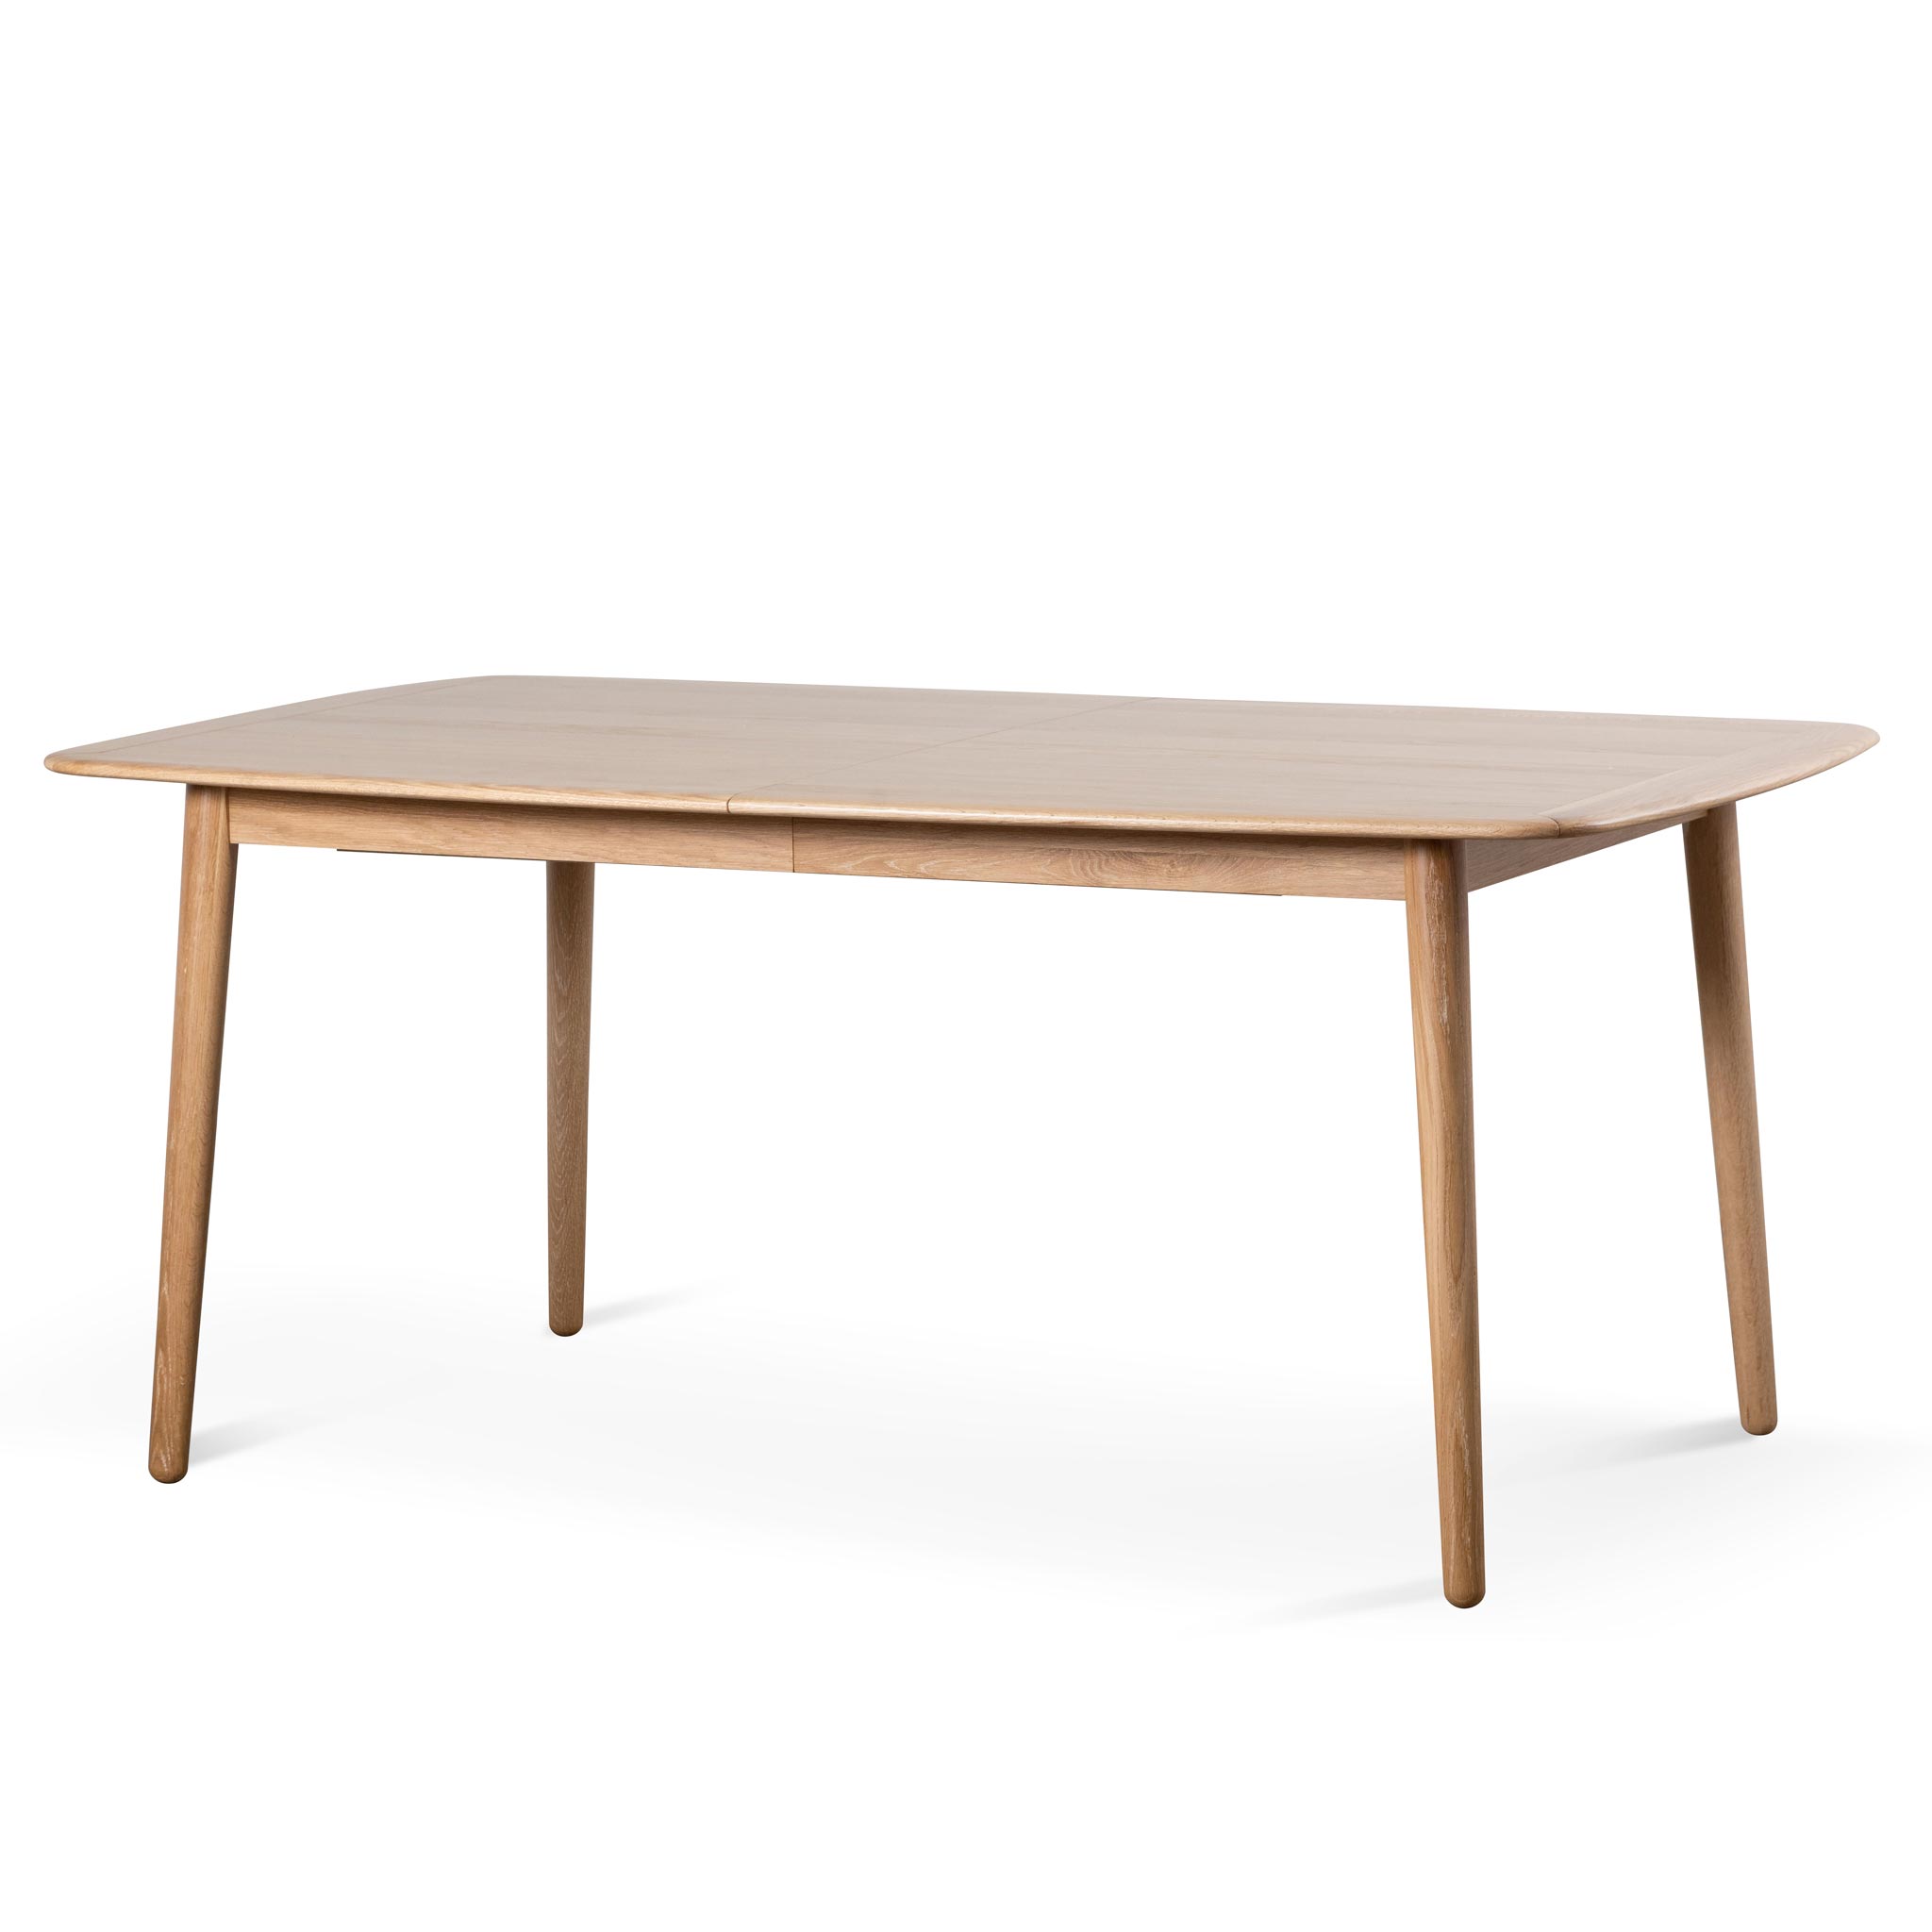 Kenston Extendable Dining Table - Natural